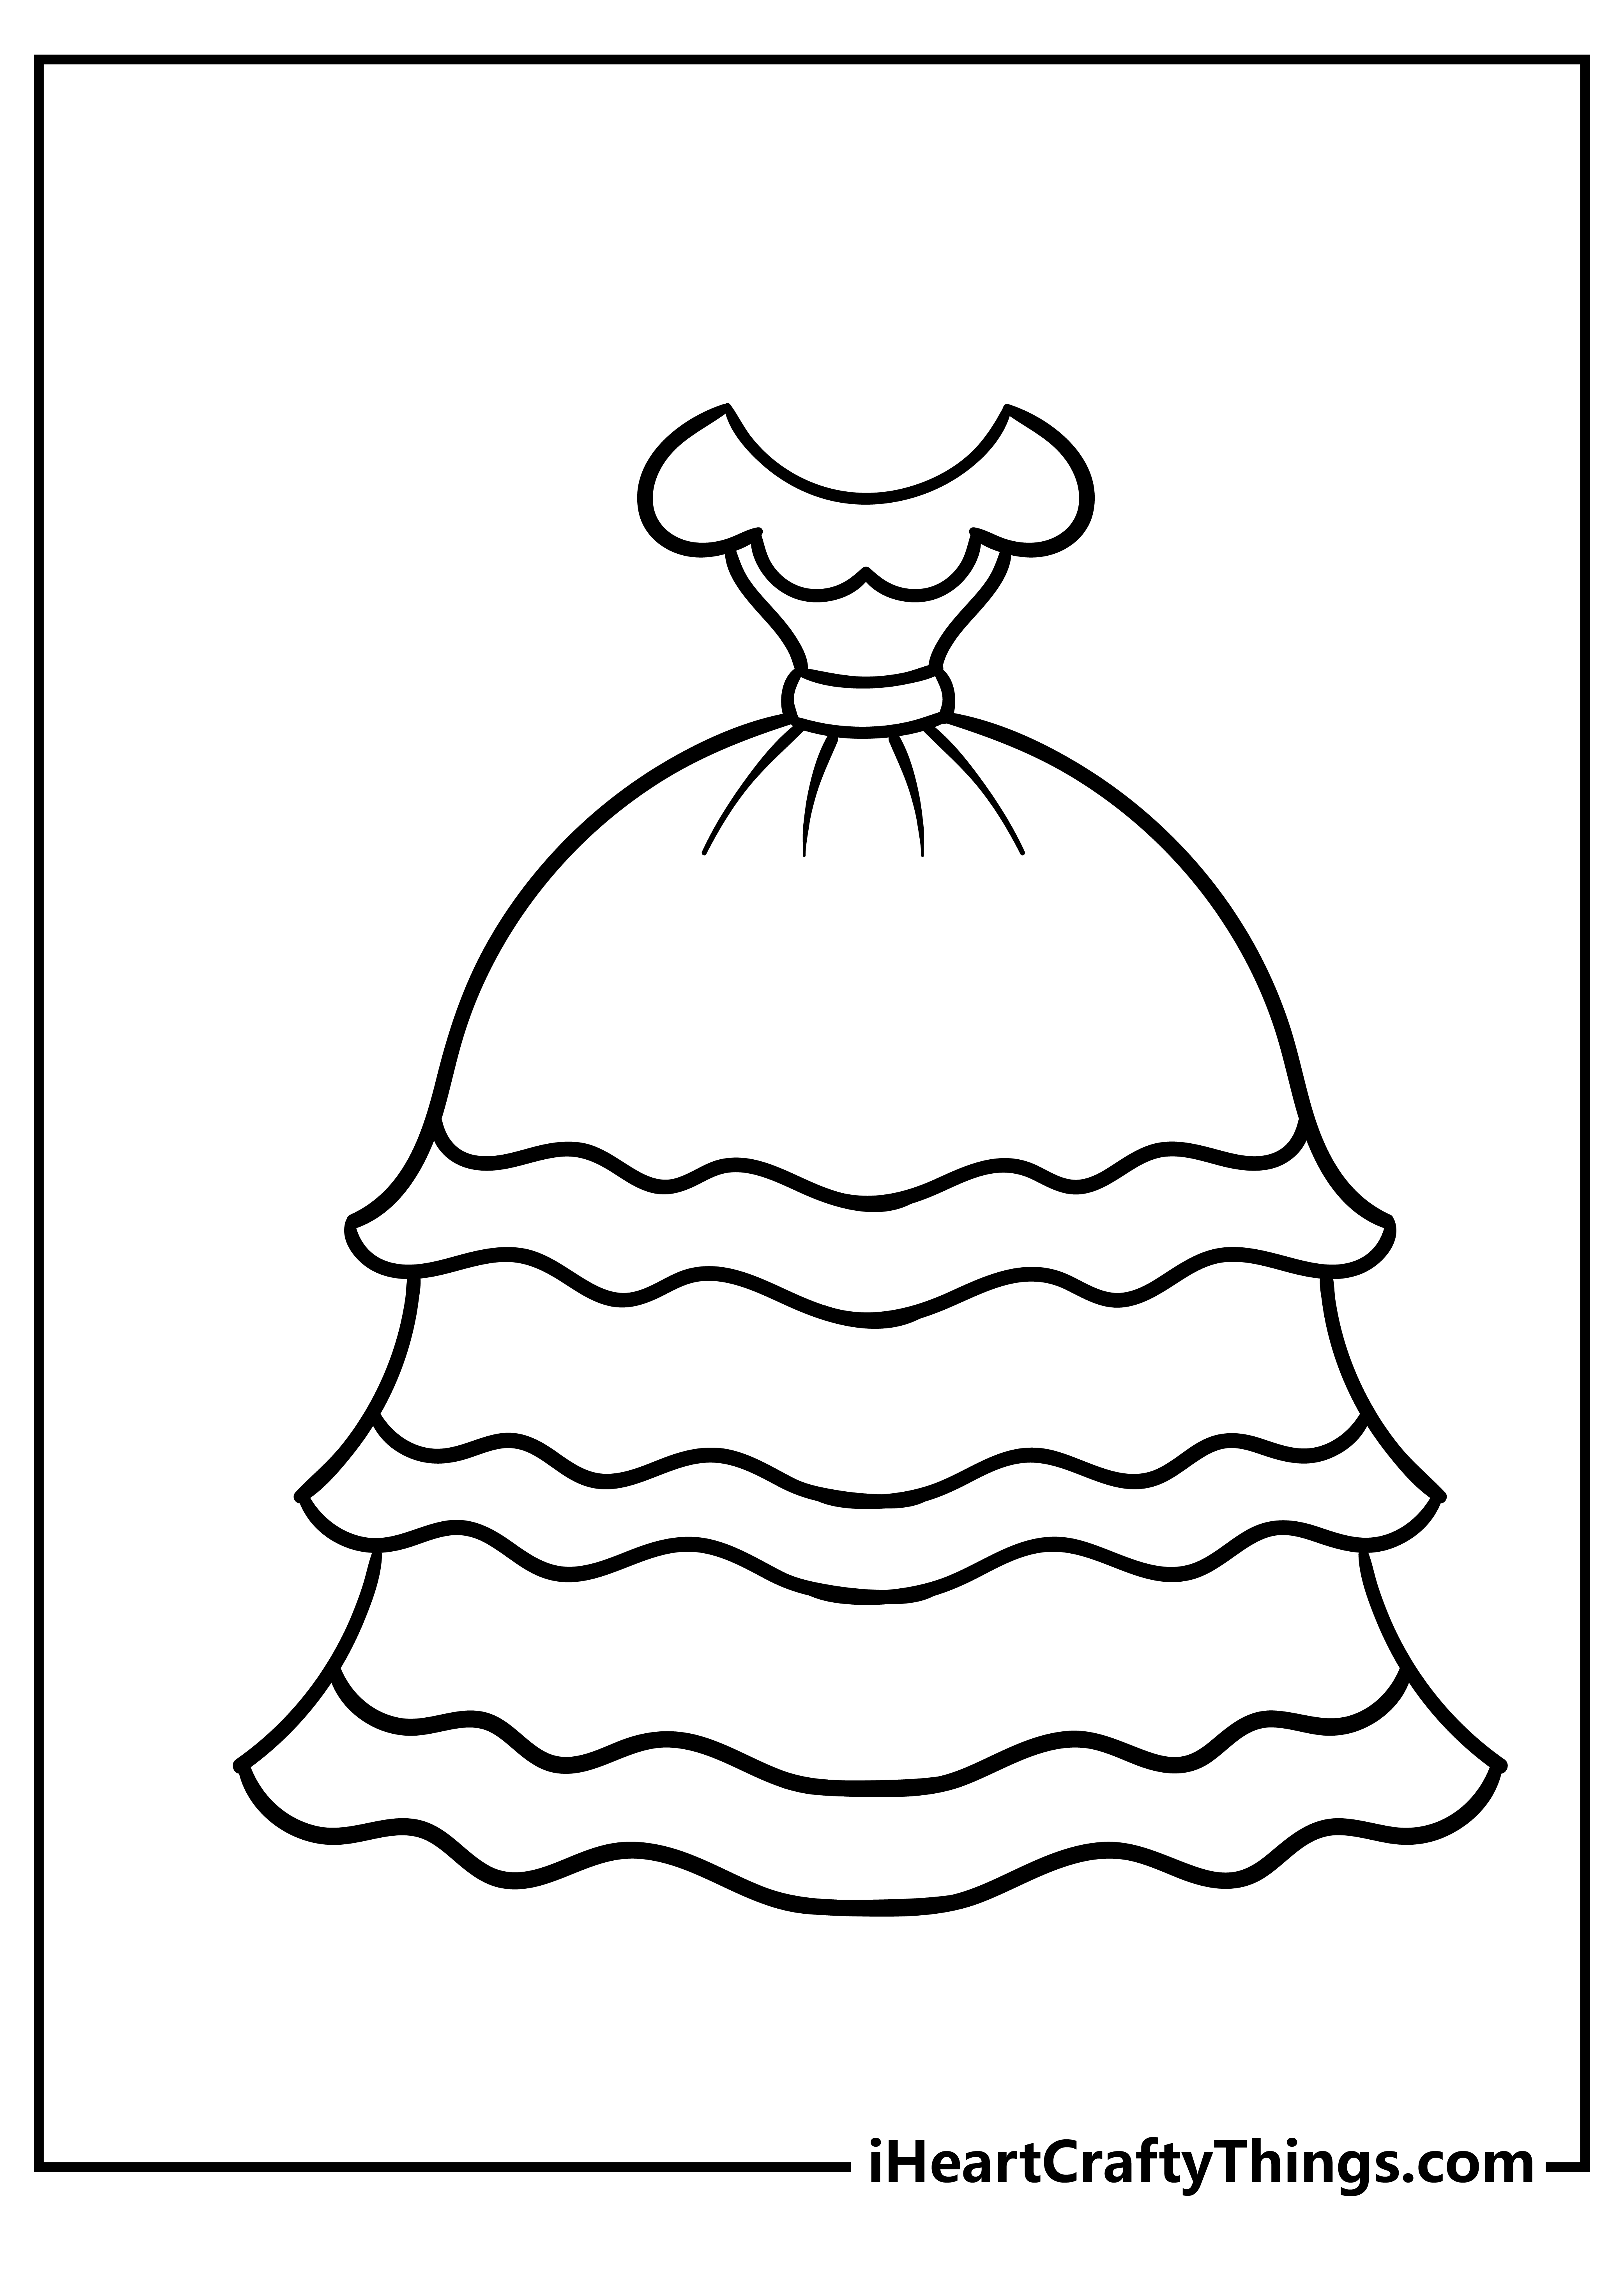 Dress Coloring Pages free pdf download